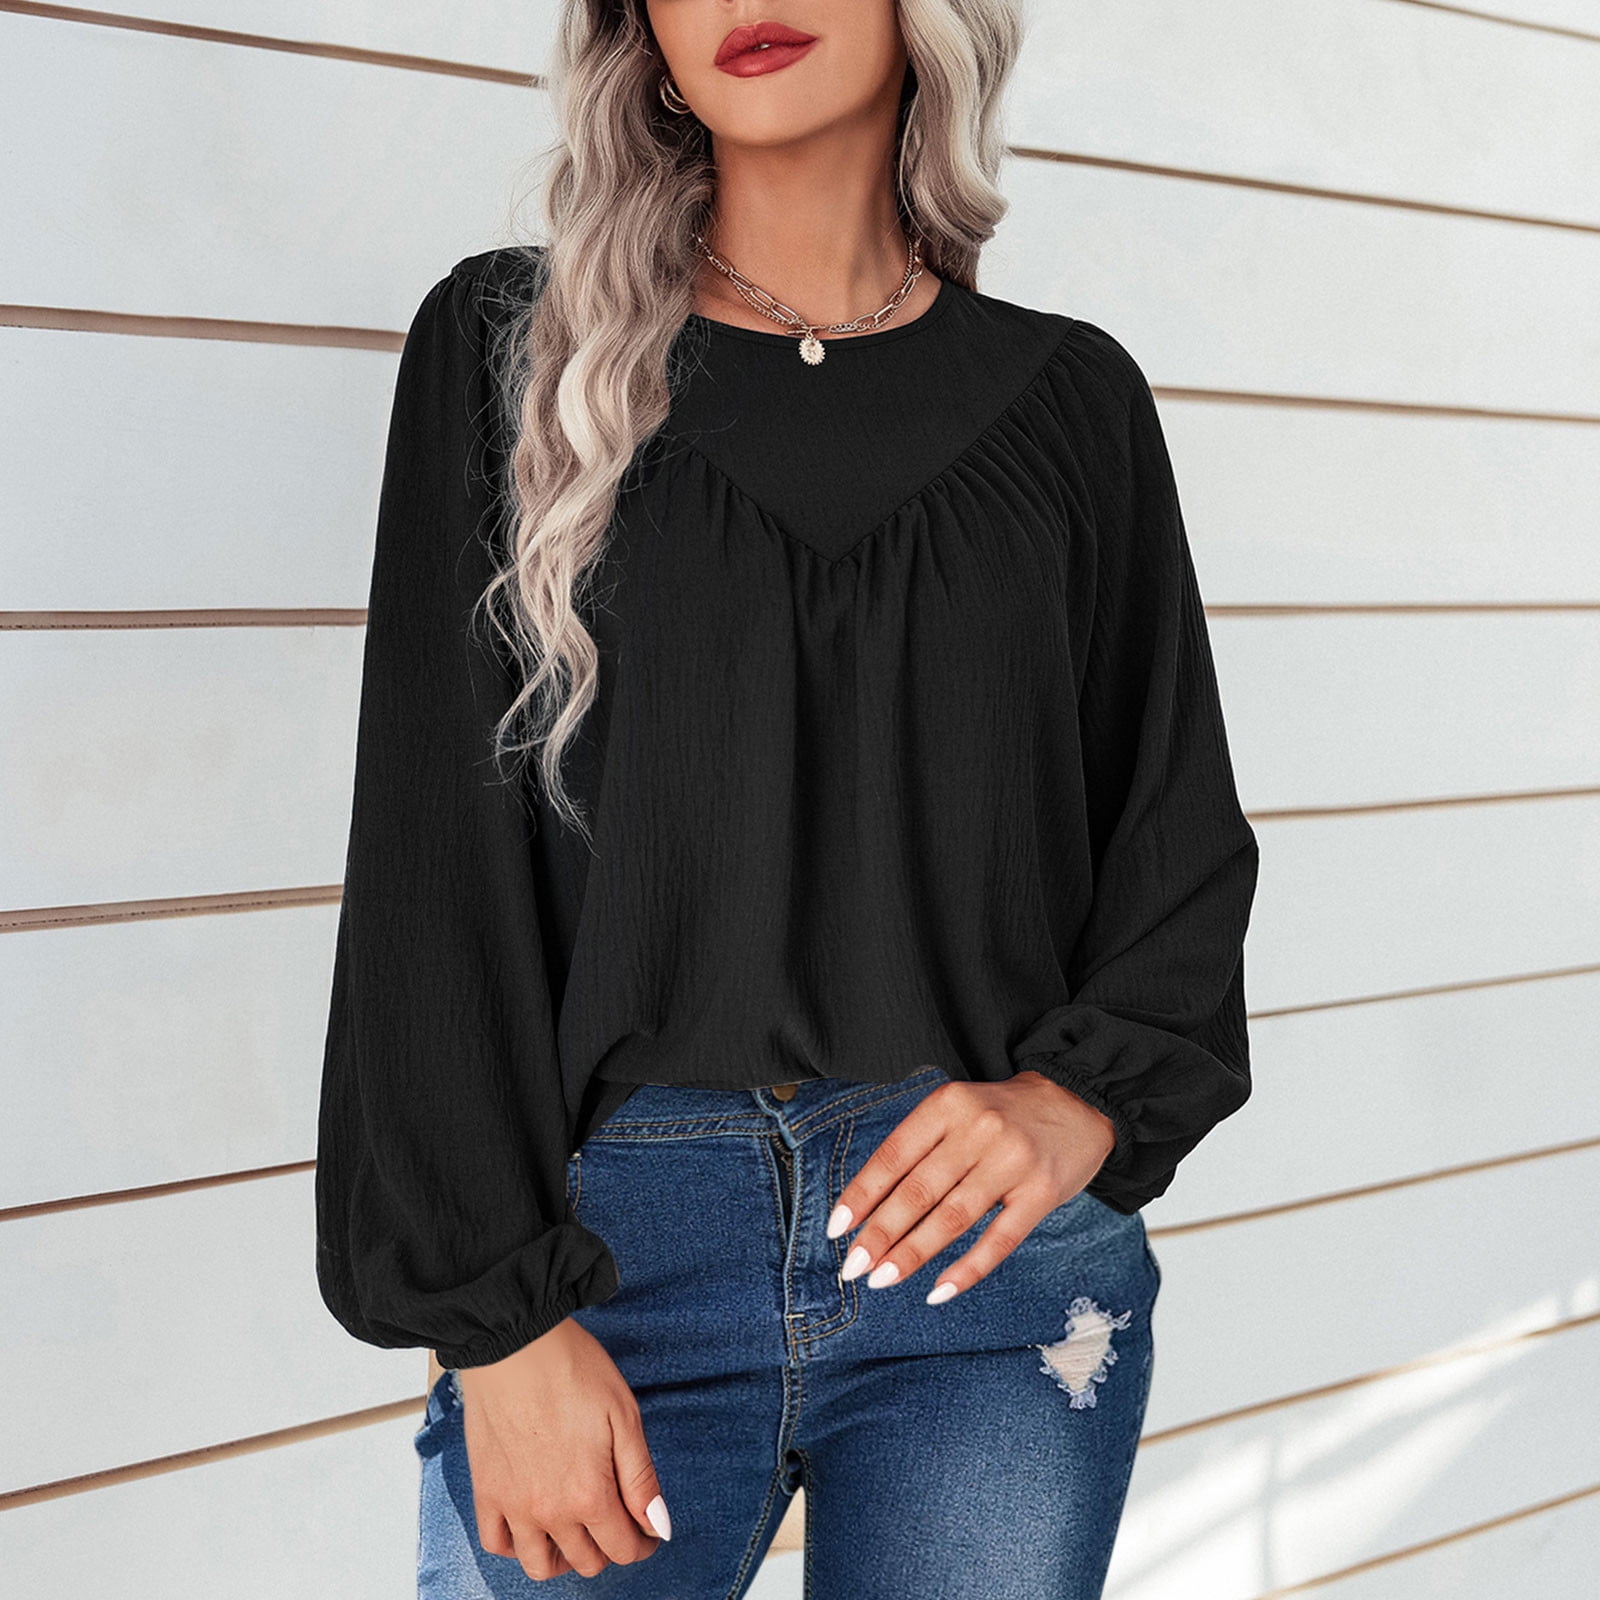 Women Long Sleeve Tops Plain Tops Autumn Sleeve Patchwork Neck Lantern Solid T Shirts Dressy 8-16 Shirt Casual Loose & Round Blouses Size Ladies